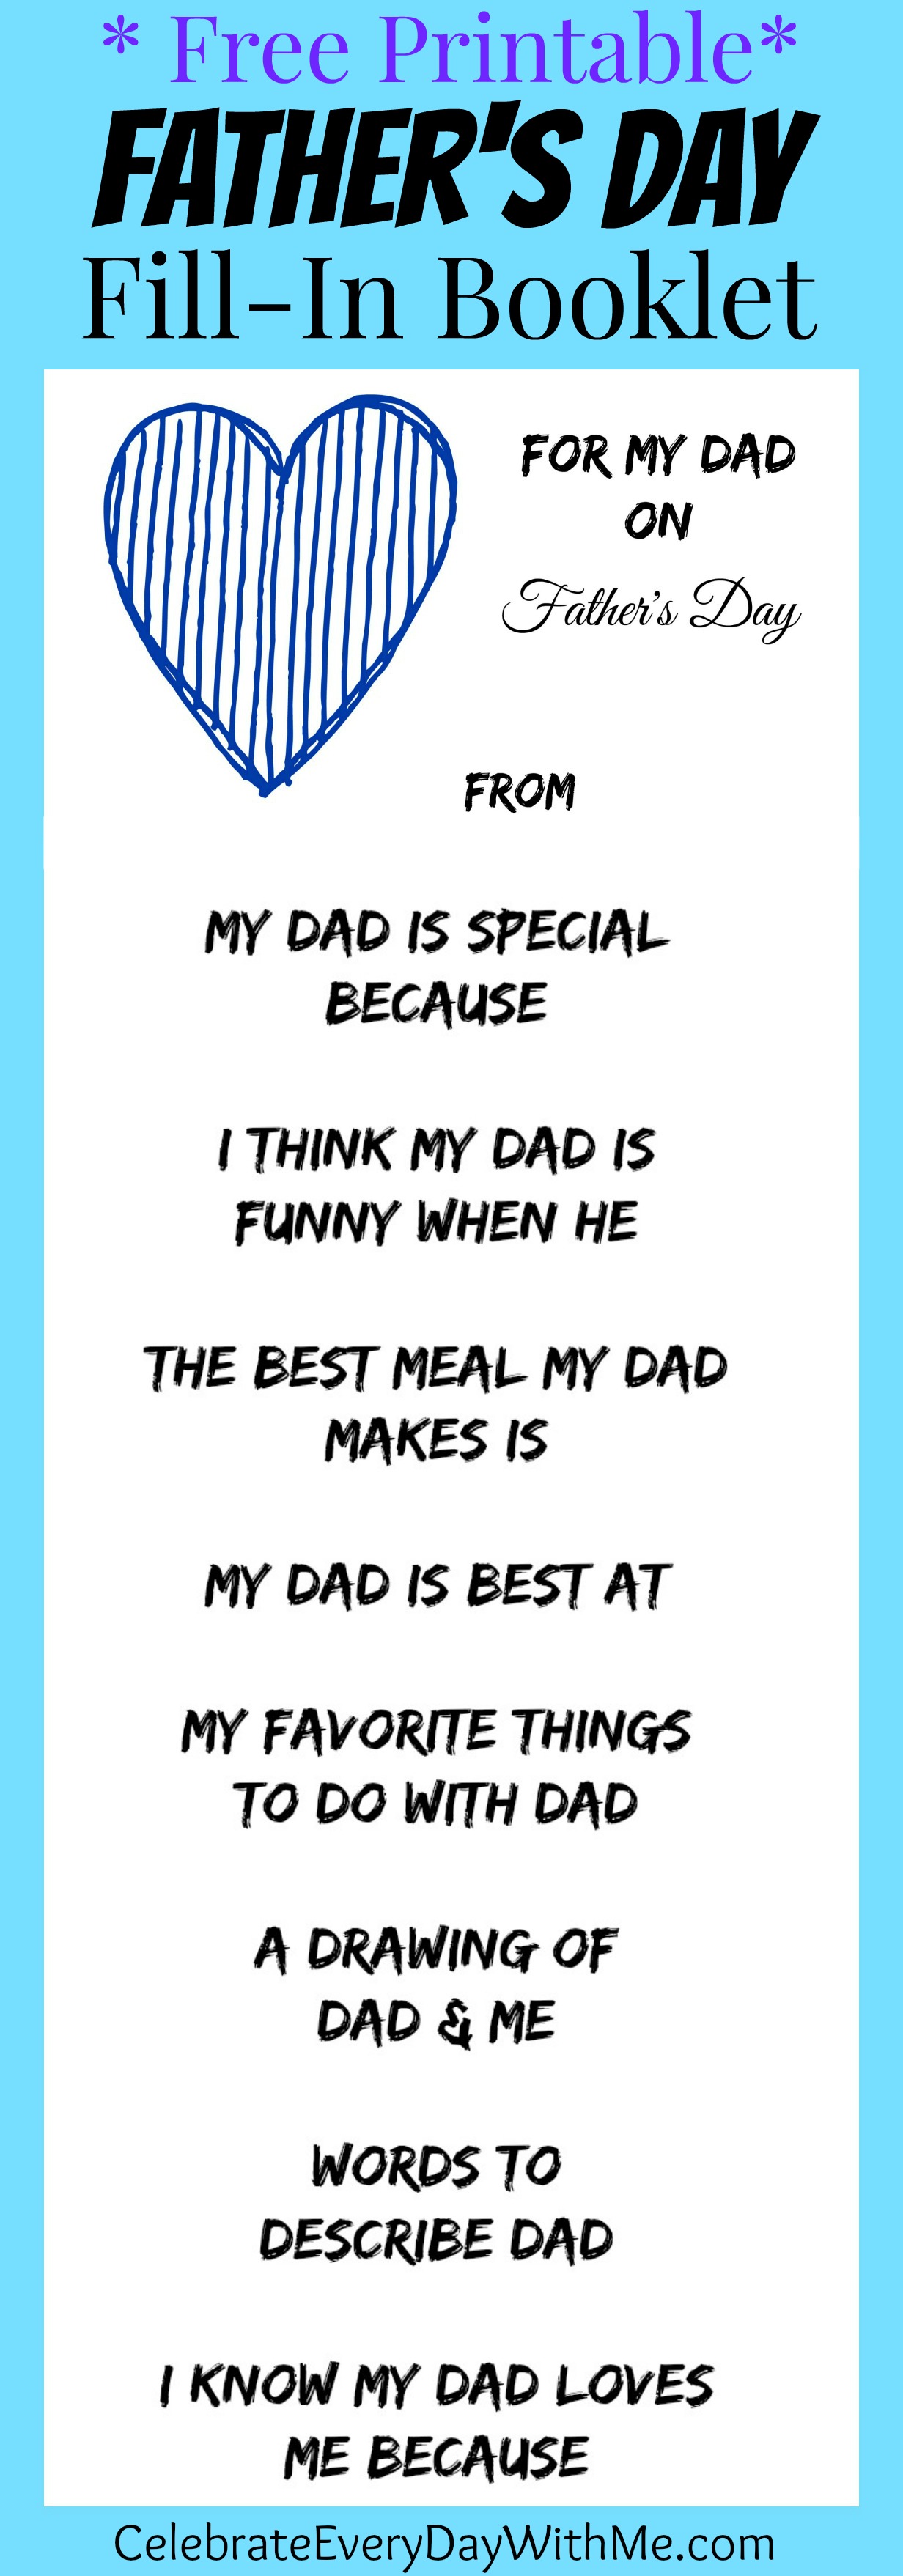 free-printable-for-father-s-day-celebrate-every-day-with-me